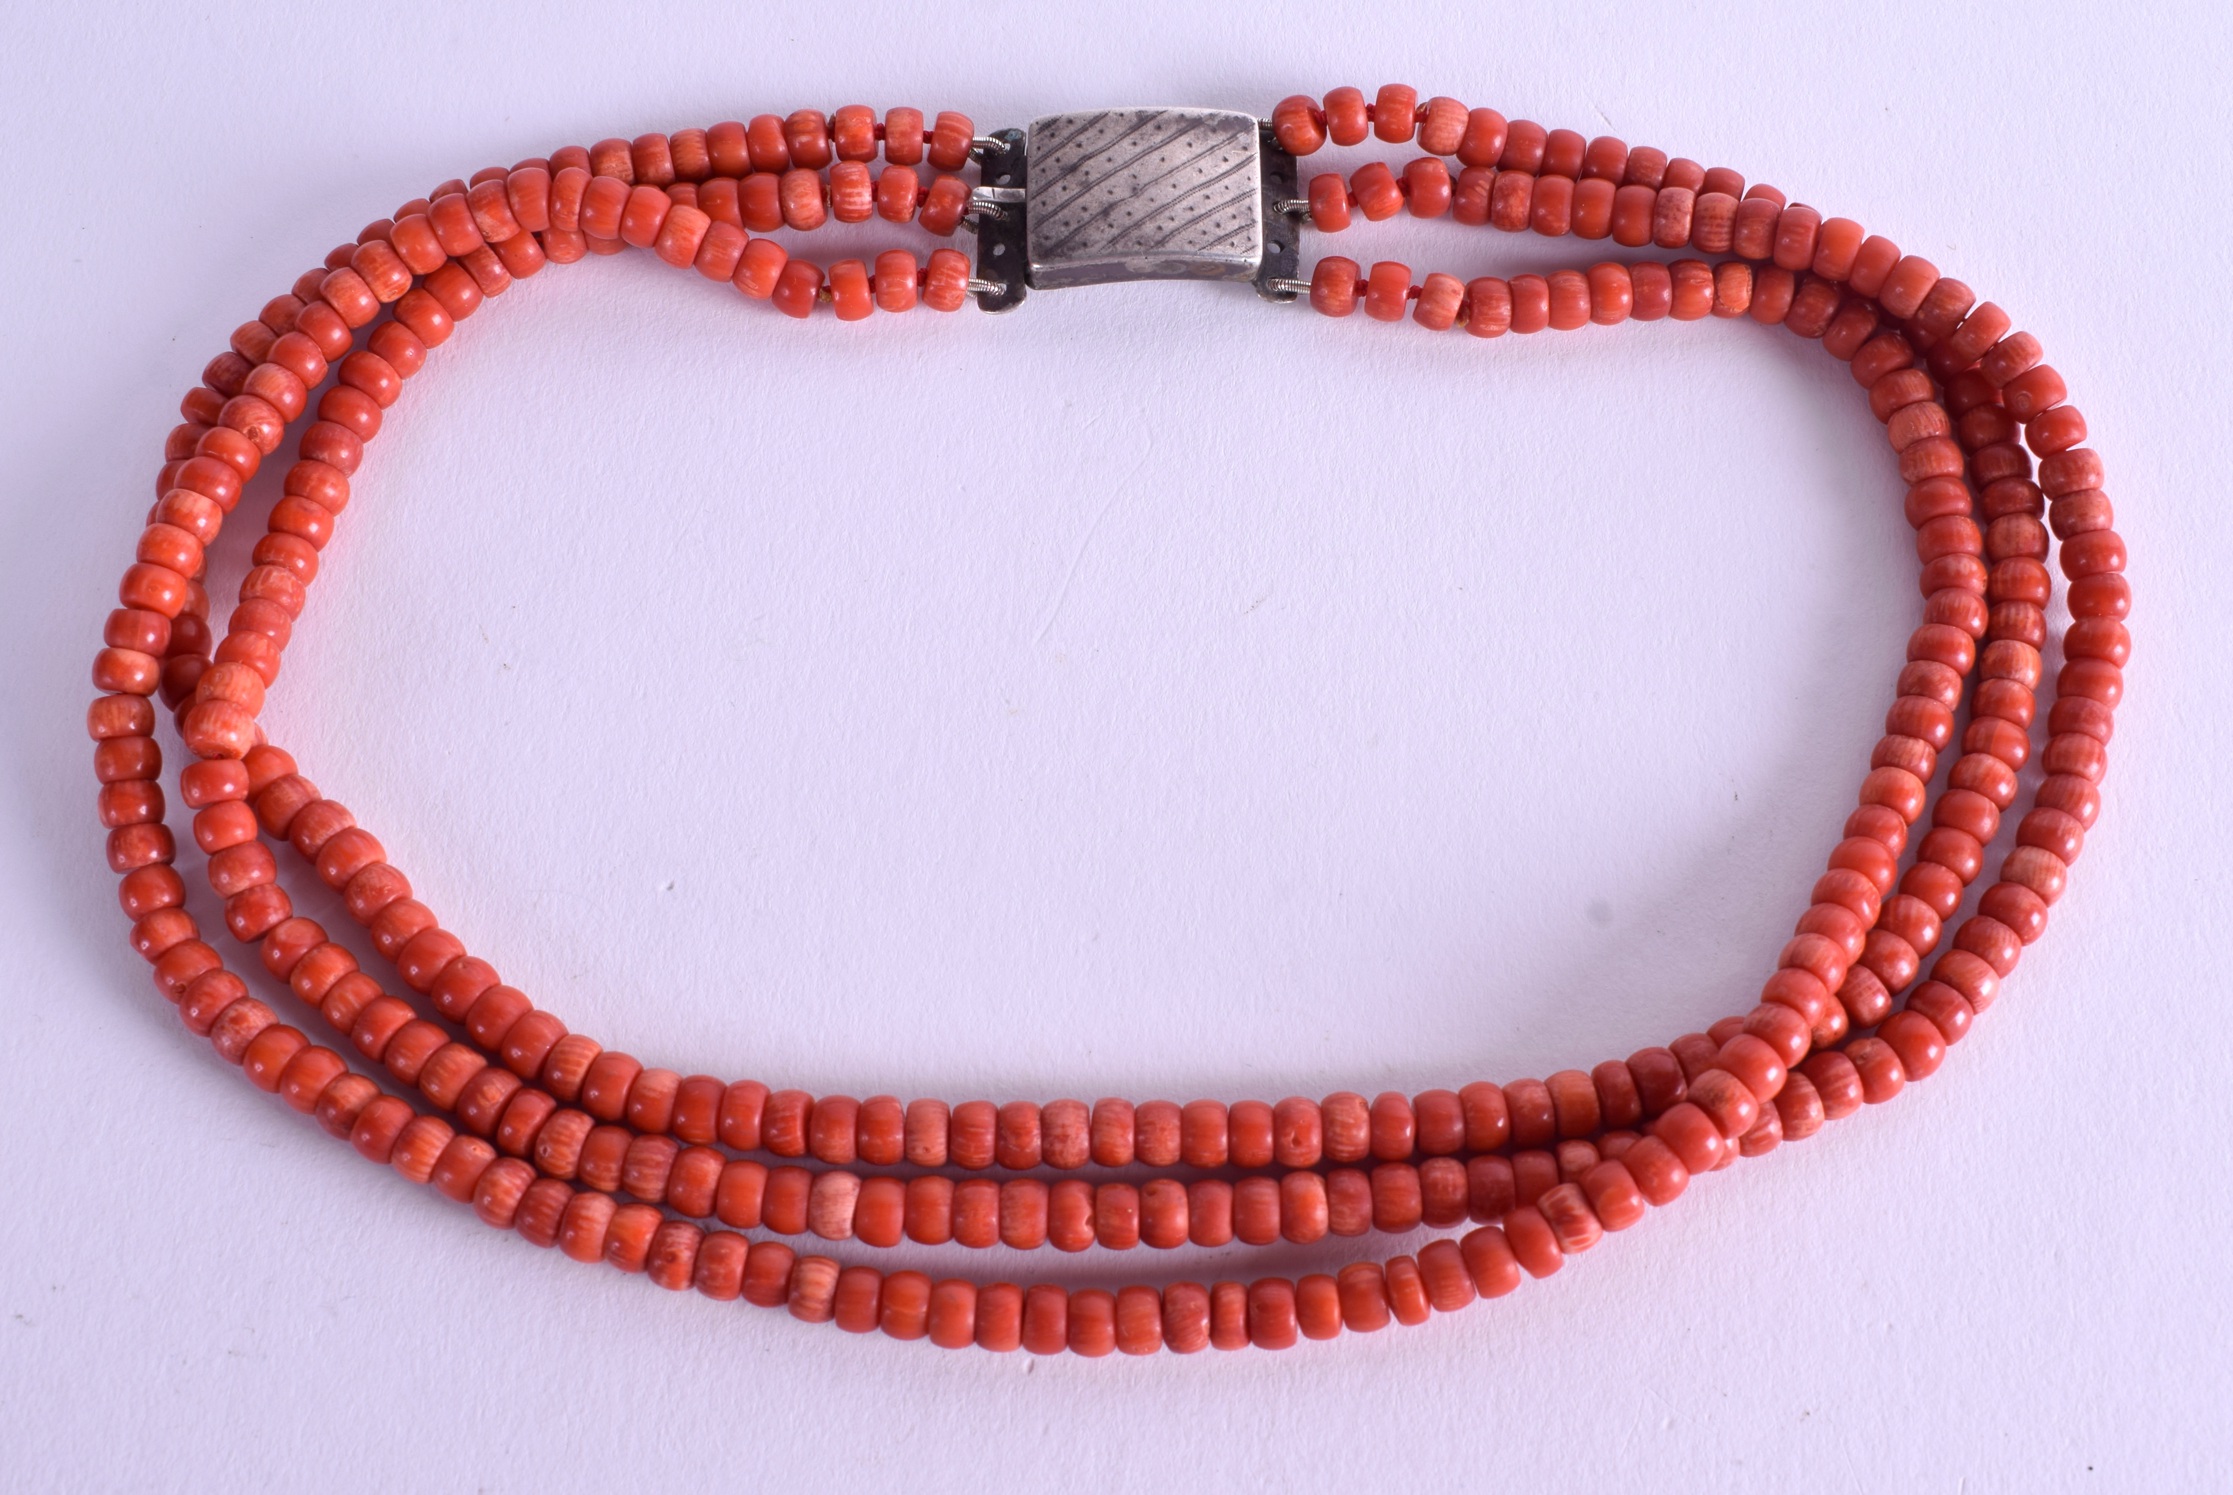 AN EARLY 20TH CENTURY SILVER AND CORAL NECKLACE. 74 grams. Each strand 36 cm long.